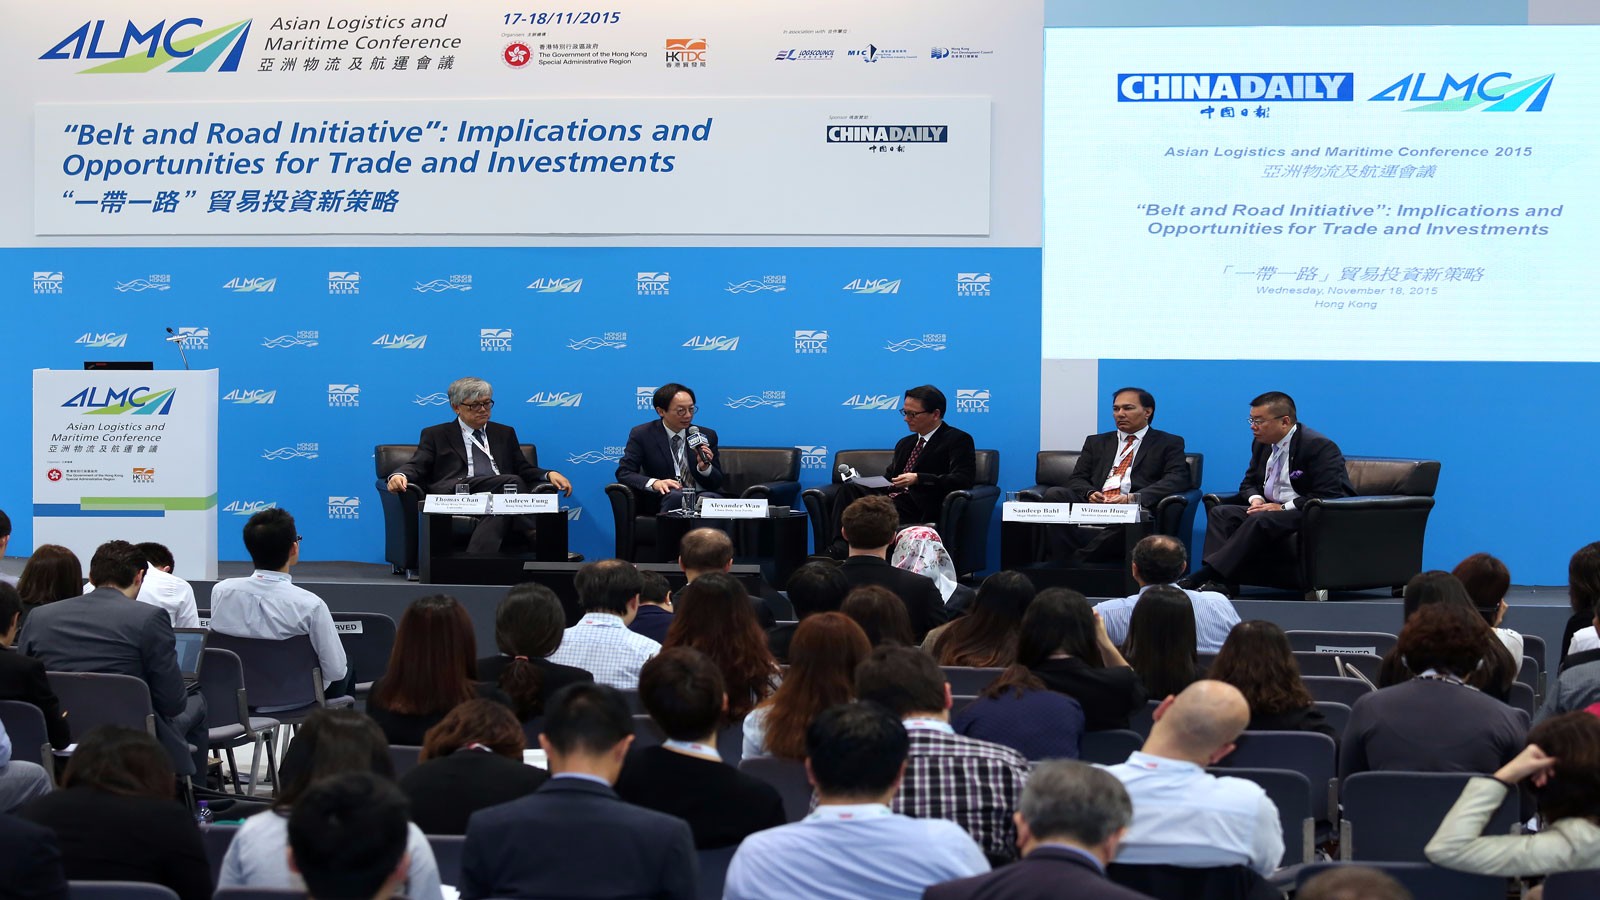 China Daily Co-branded session at Asian Logistics and Maritime Conference on 18 Nov, 2015 (ENG)